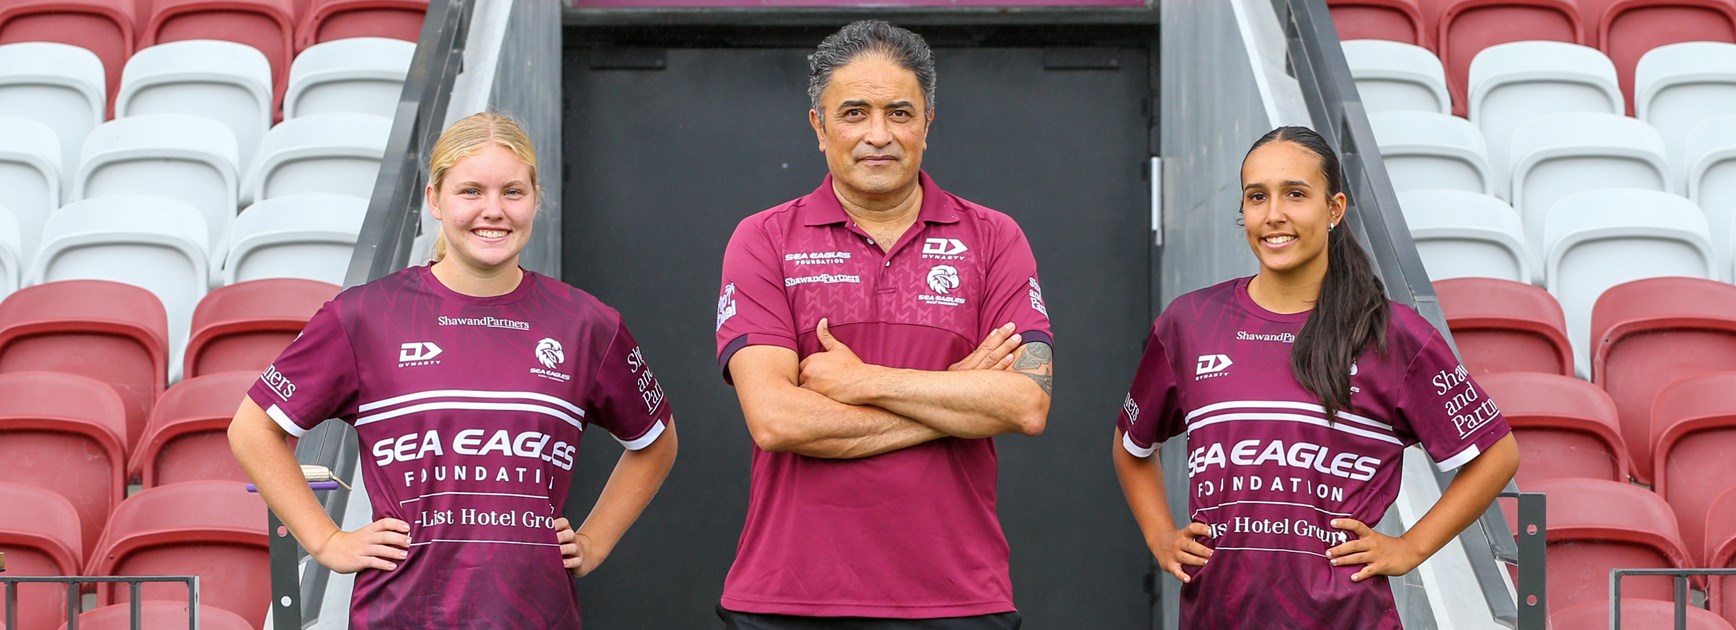 Manly Co-Captains  Lili Boyle (left) and Matisse Bettridge with Coach Keith Hanley